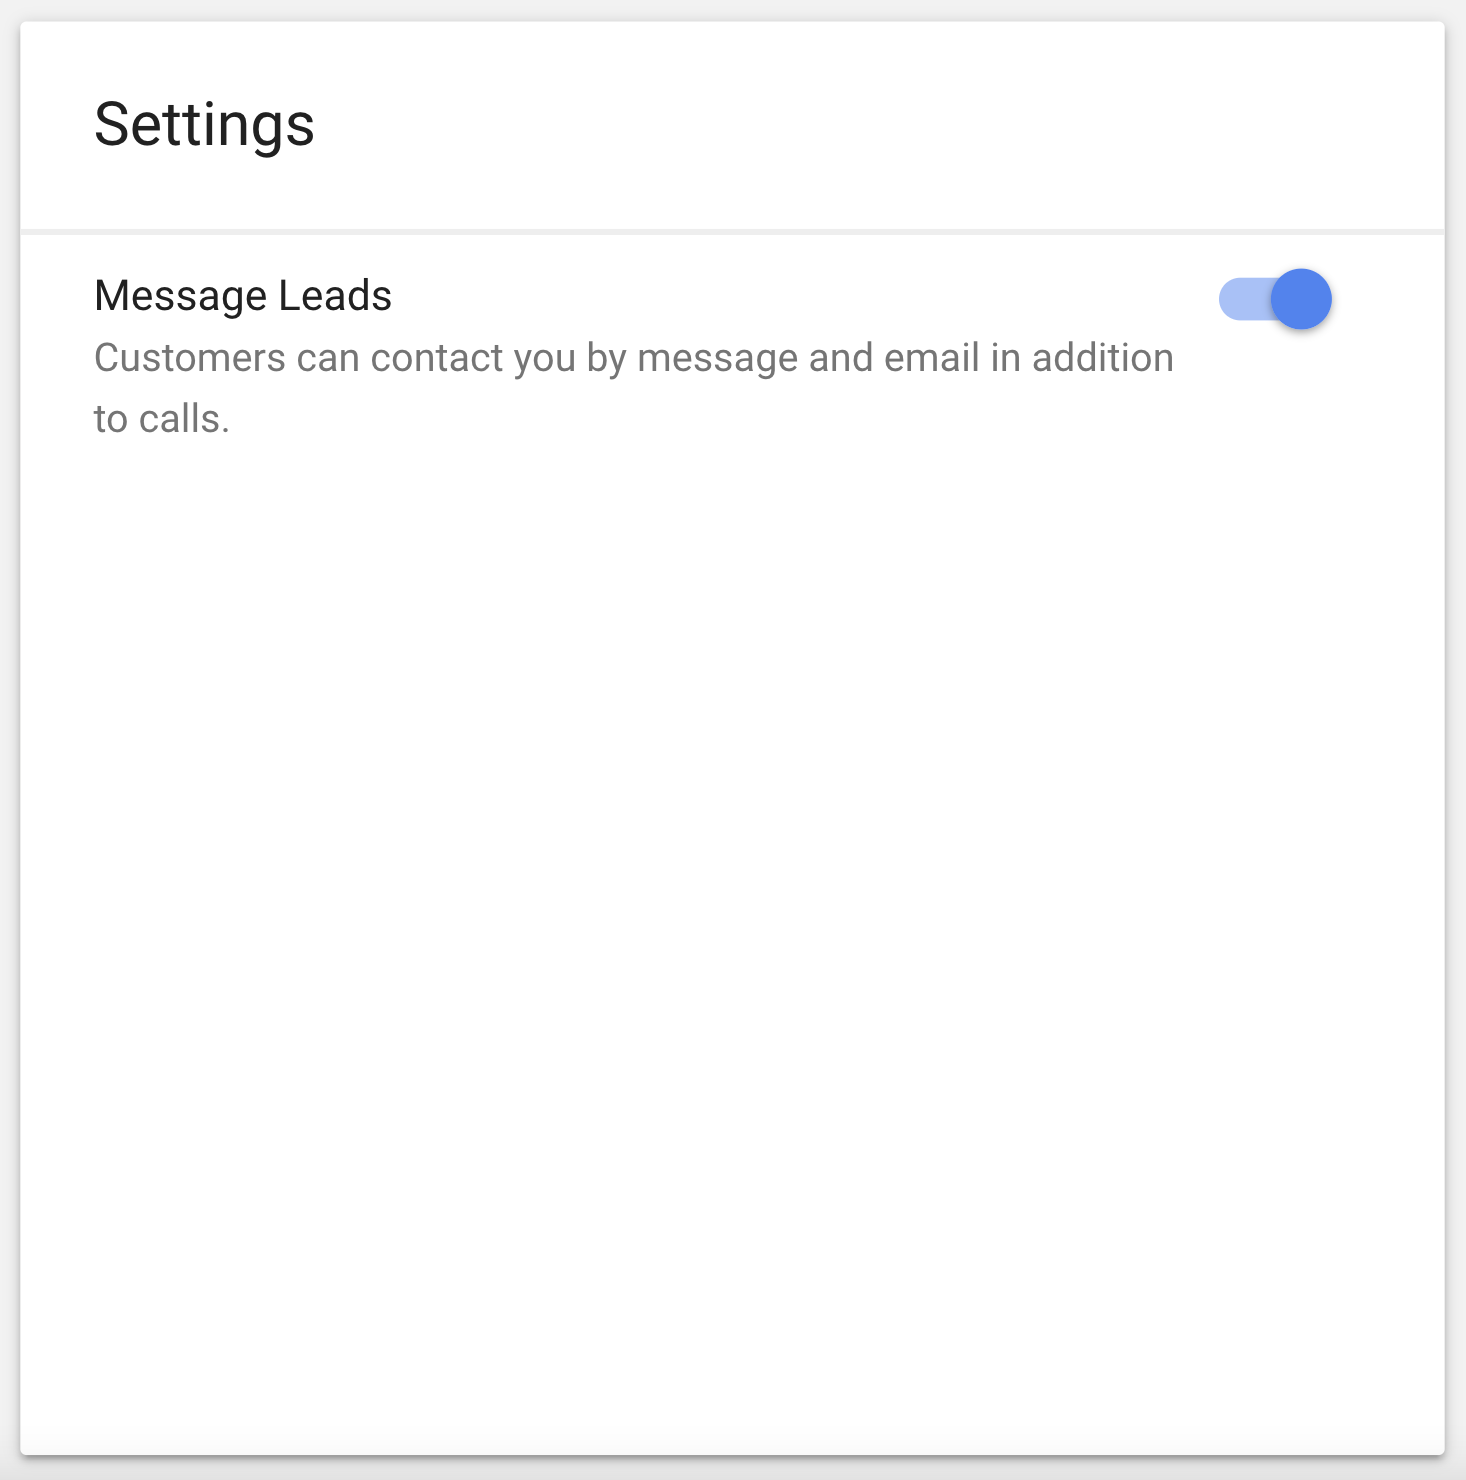 Message leads under Settings page